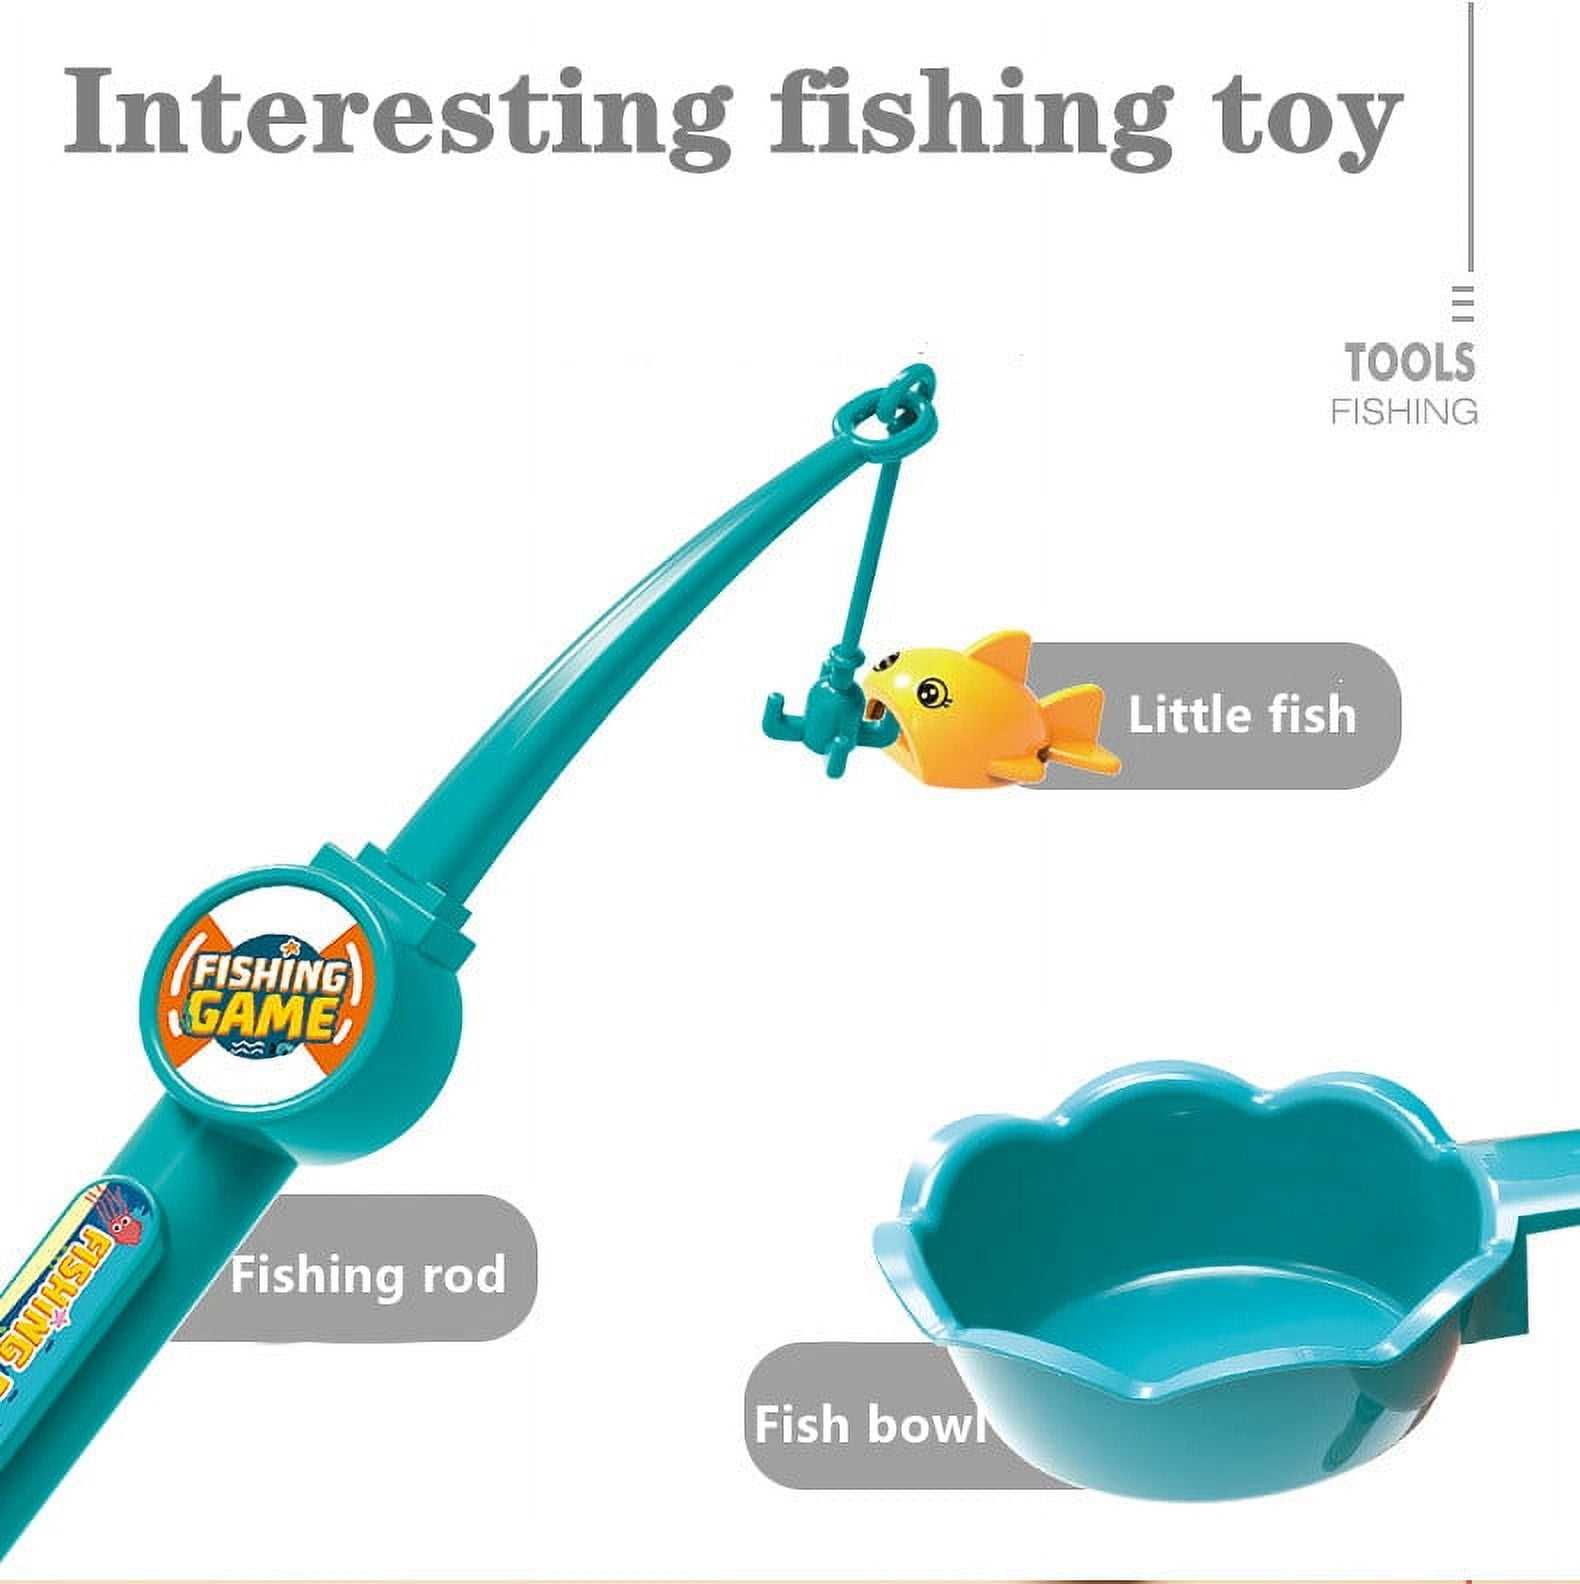 VIVEFOX Fishing Toys, Fishing Game Toys with Slideway